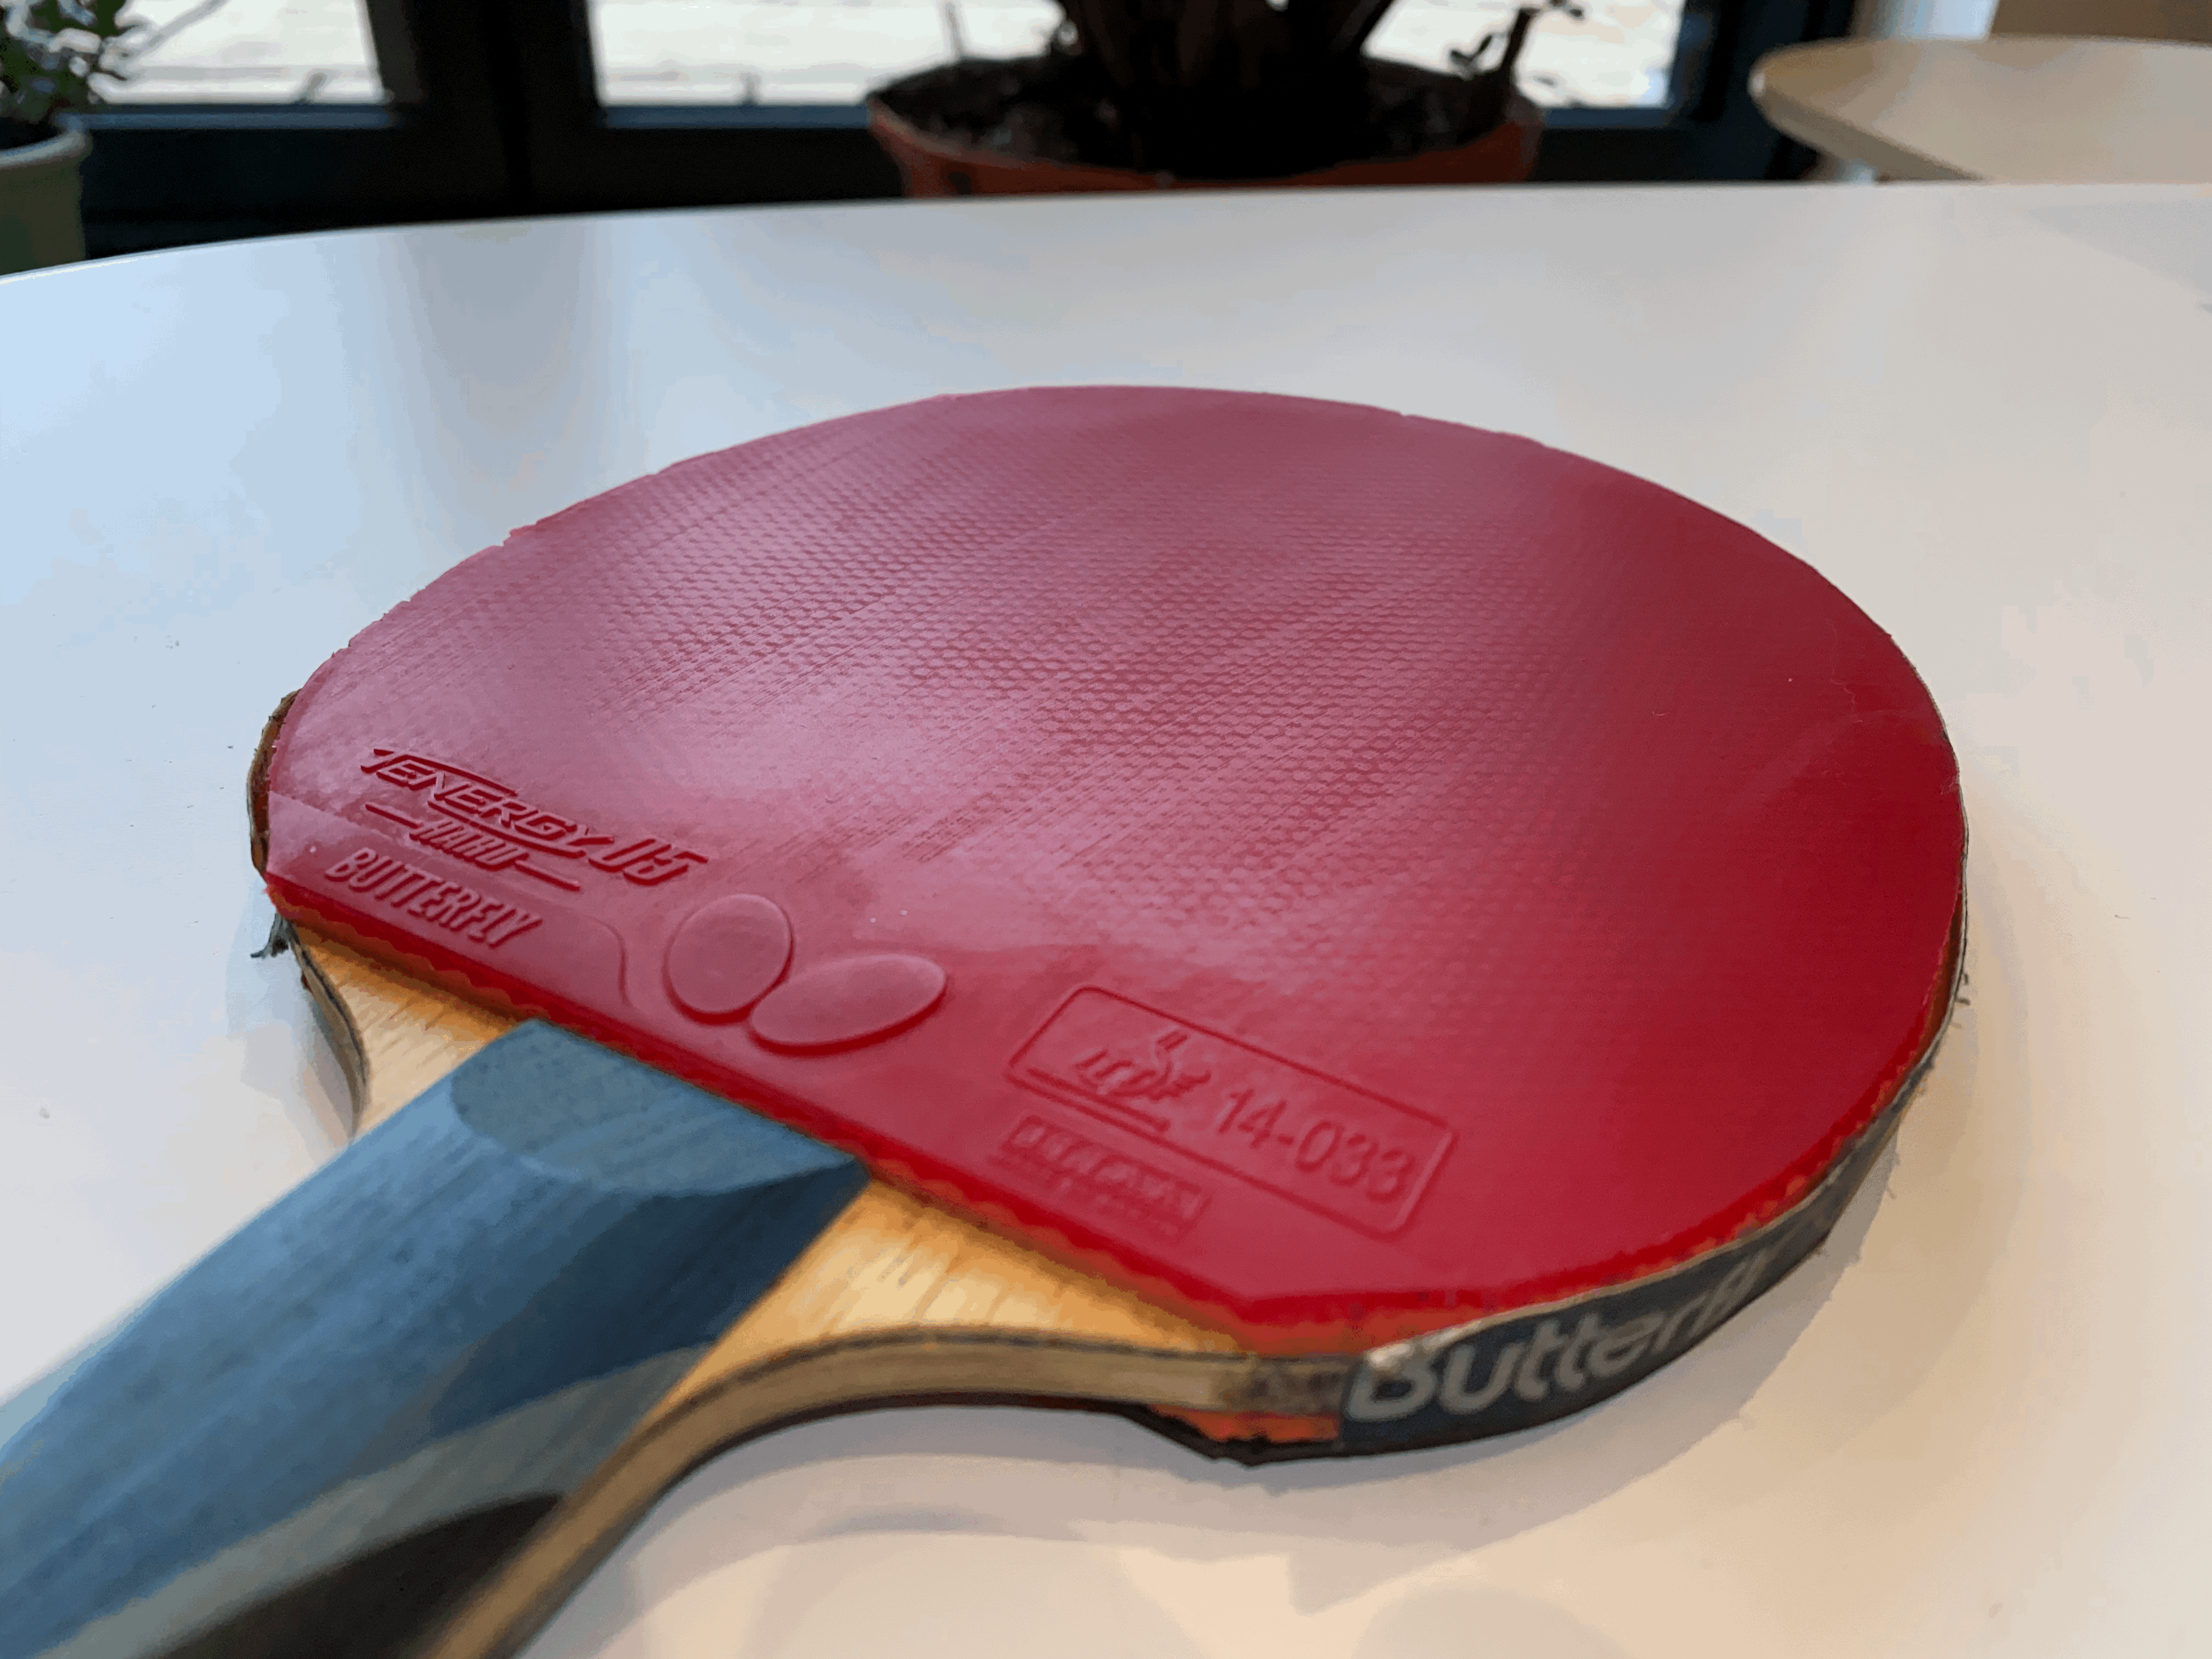 Table Tennis Equipment (Everything)